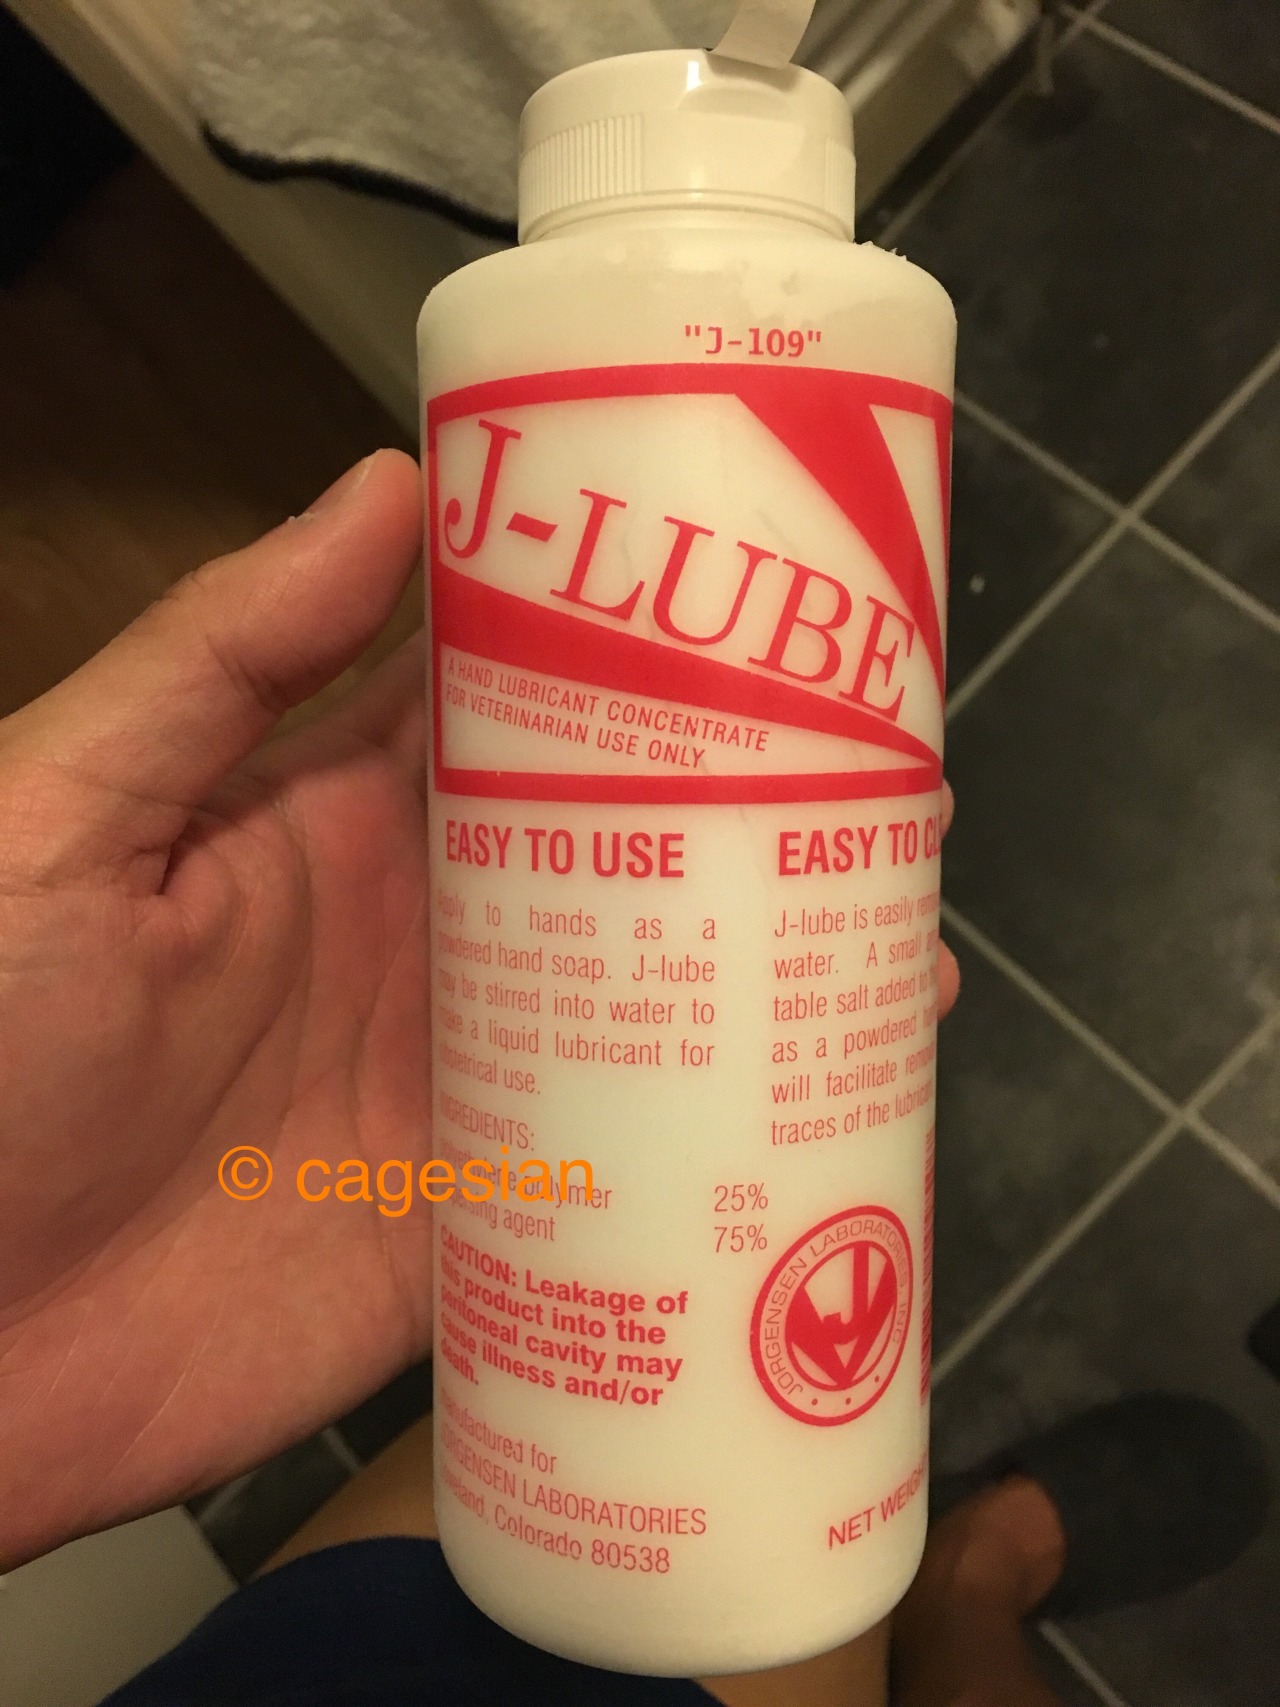 cagesian:  So played with this at the weekend to try out some J-Lube I bought. The